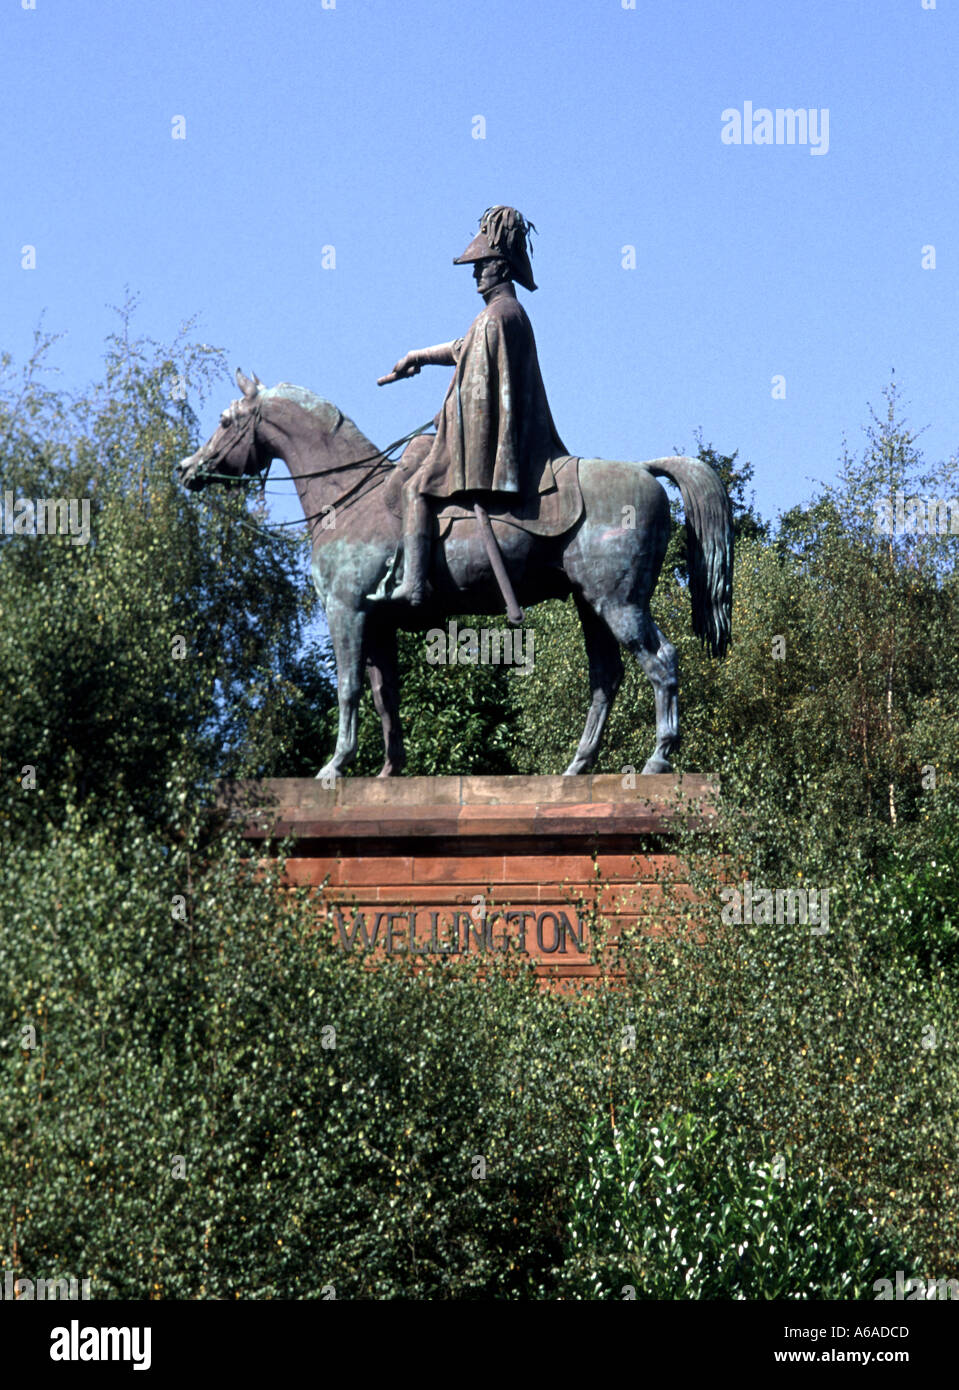 First Duke of Wellington mounted on his horse in a close up of equestrion statue on a blue sky day at Round Hill Aldershot Hampshire England UK Stock Photo